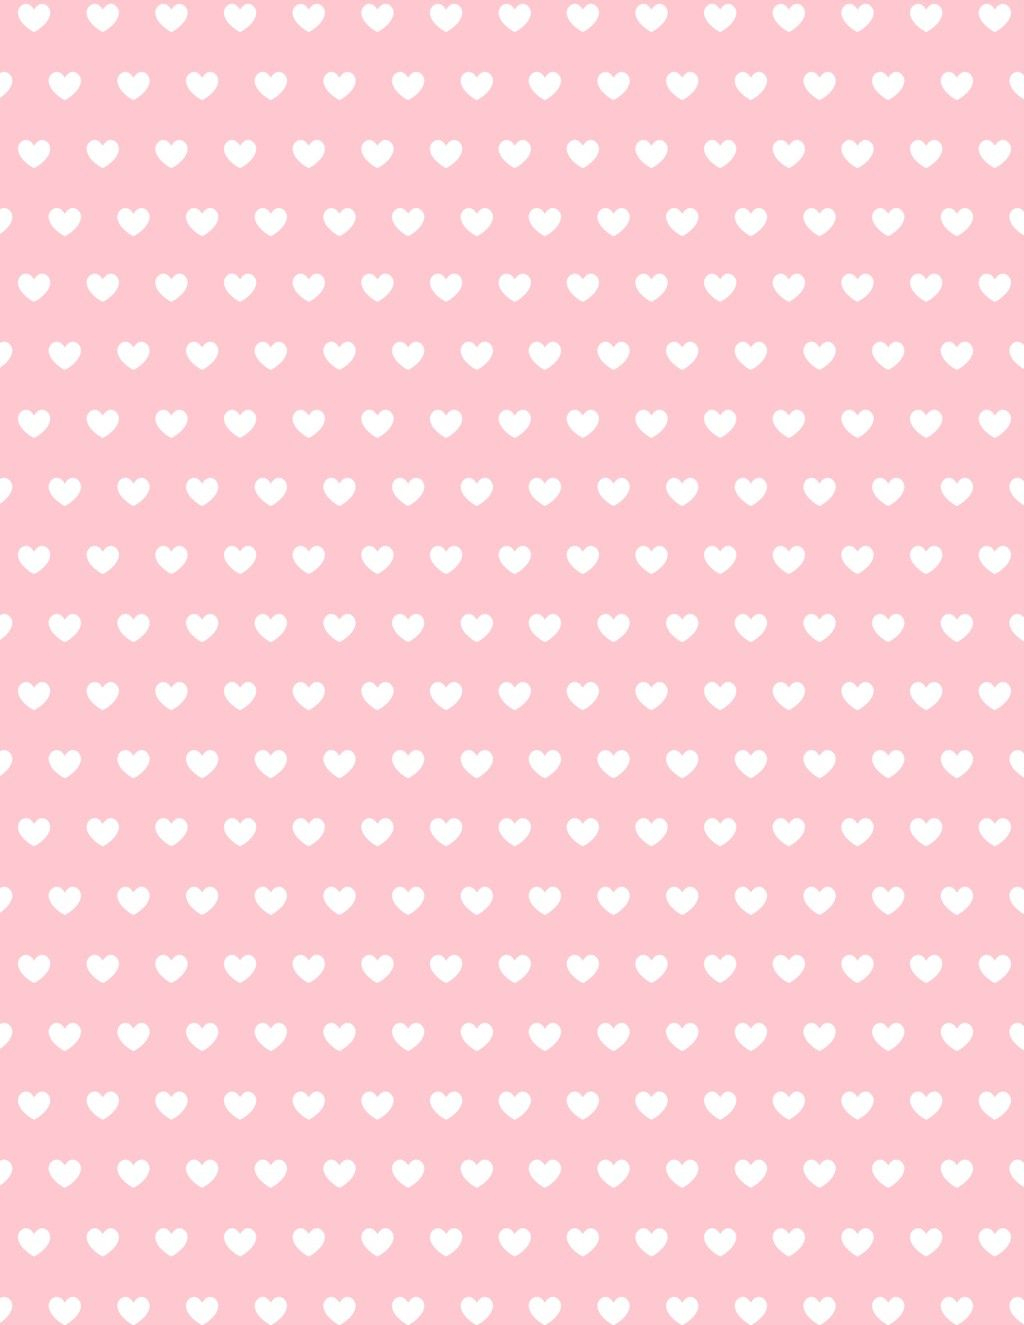 Free Valentine Hearts Scrapbook Paper | Perfect Student - Free Printable Heart Designs